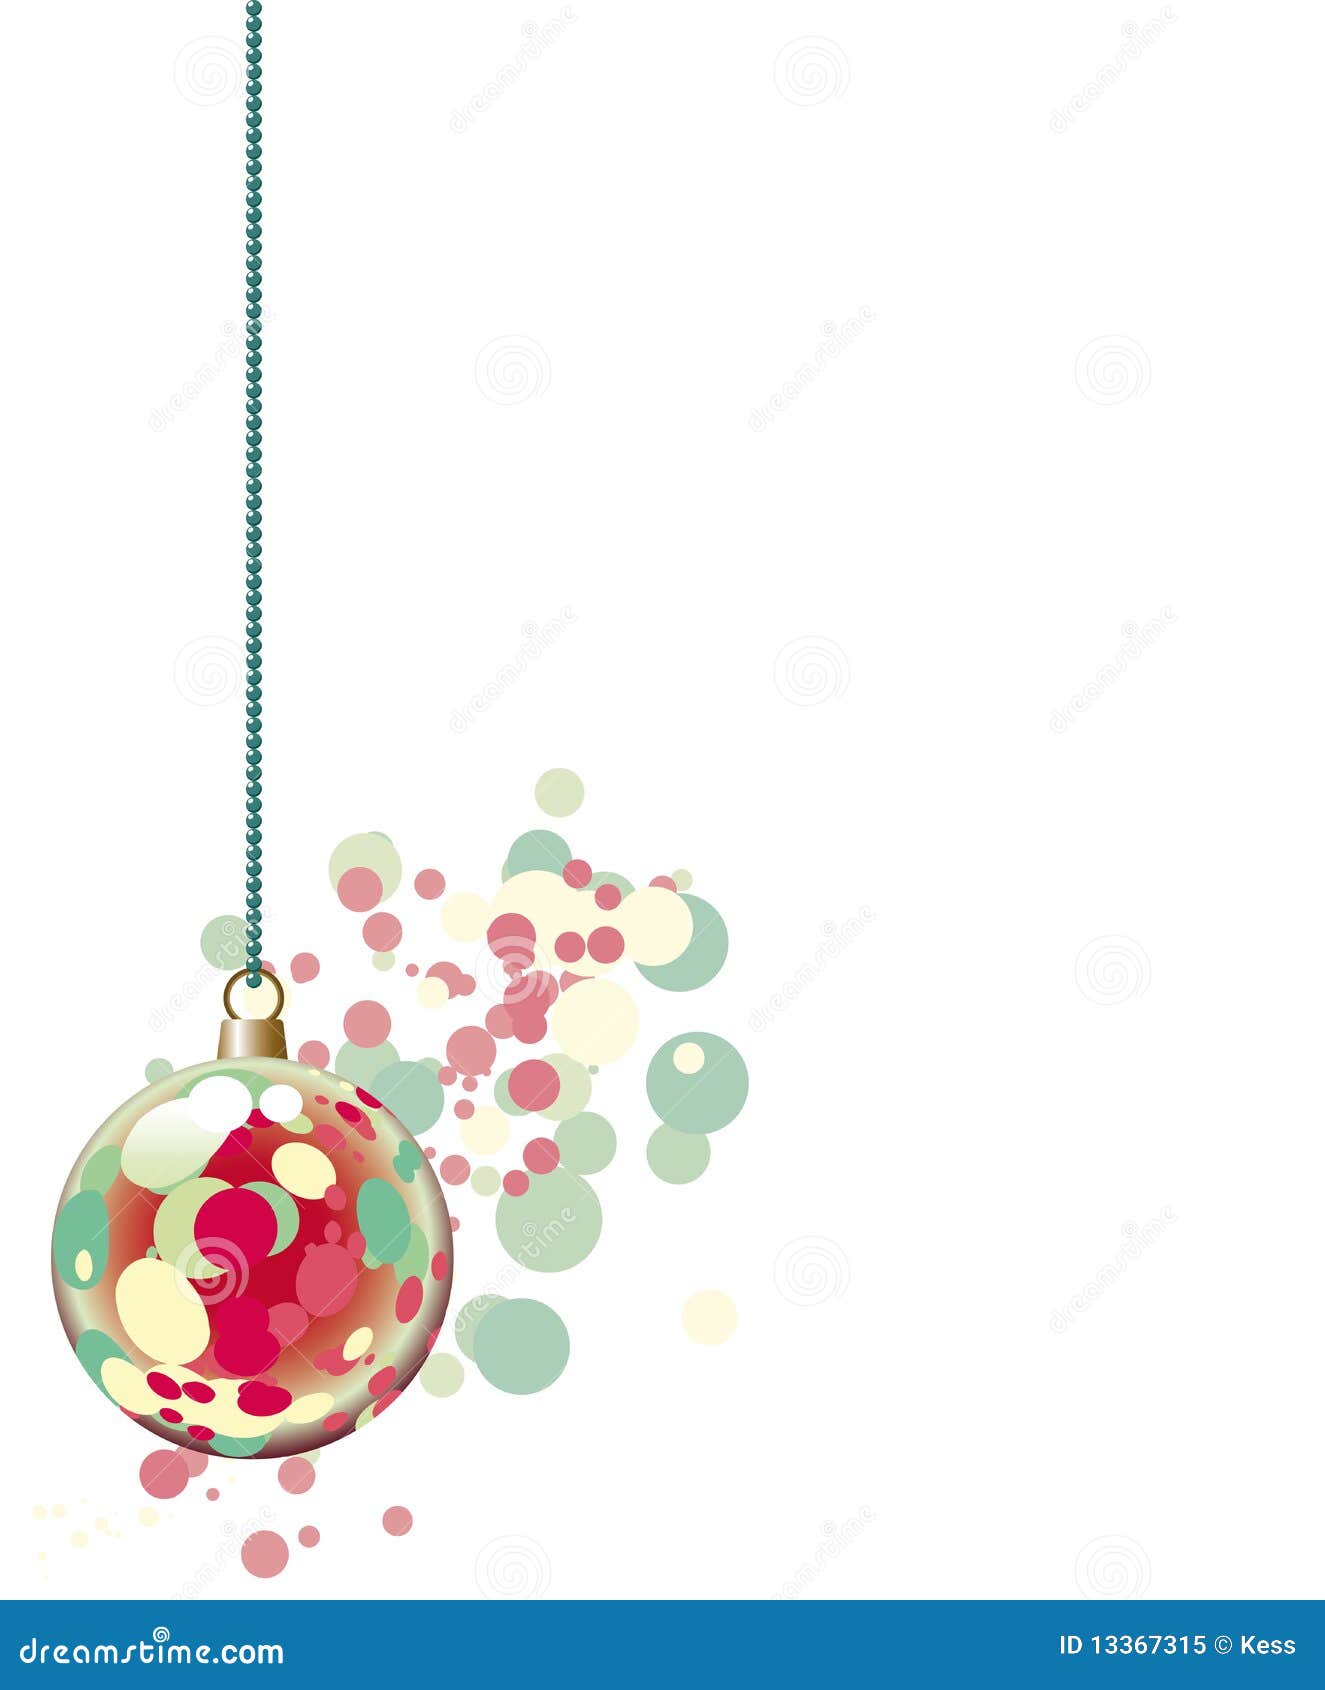 Dotted christmas ball stock vector. Illustration of ornate - 13367315